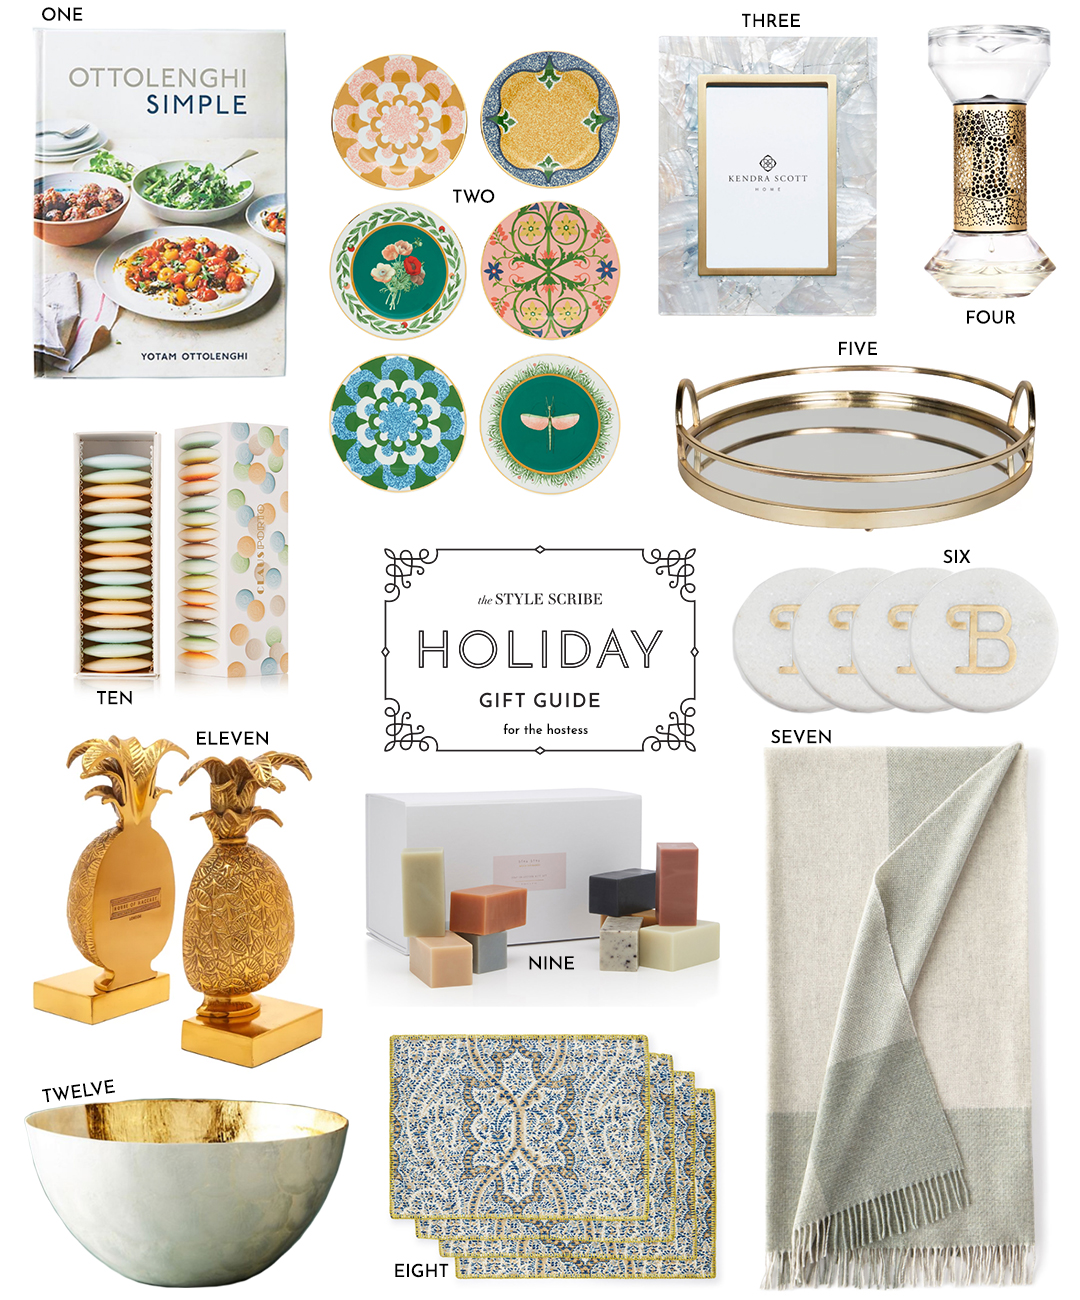 The Best Holiday Gift Ideas for the Hostess/Entertainer